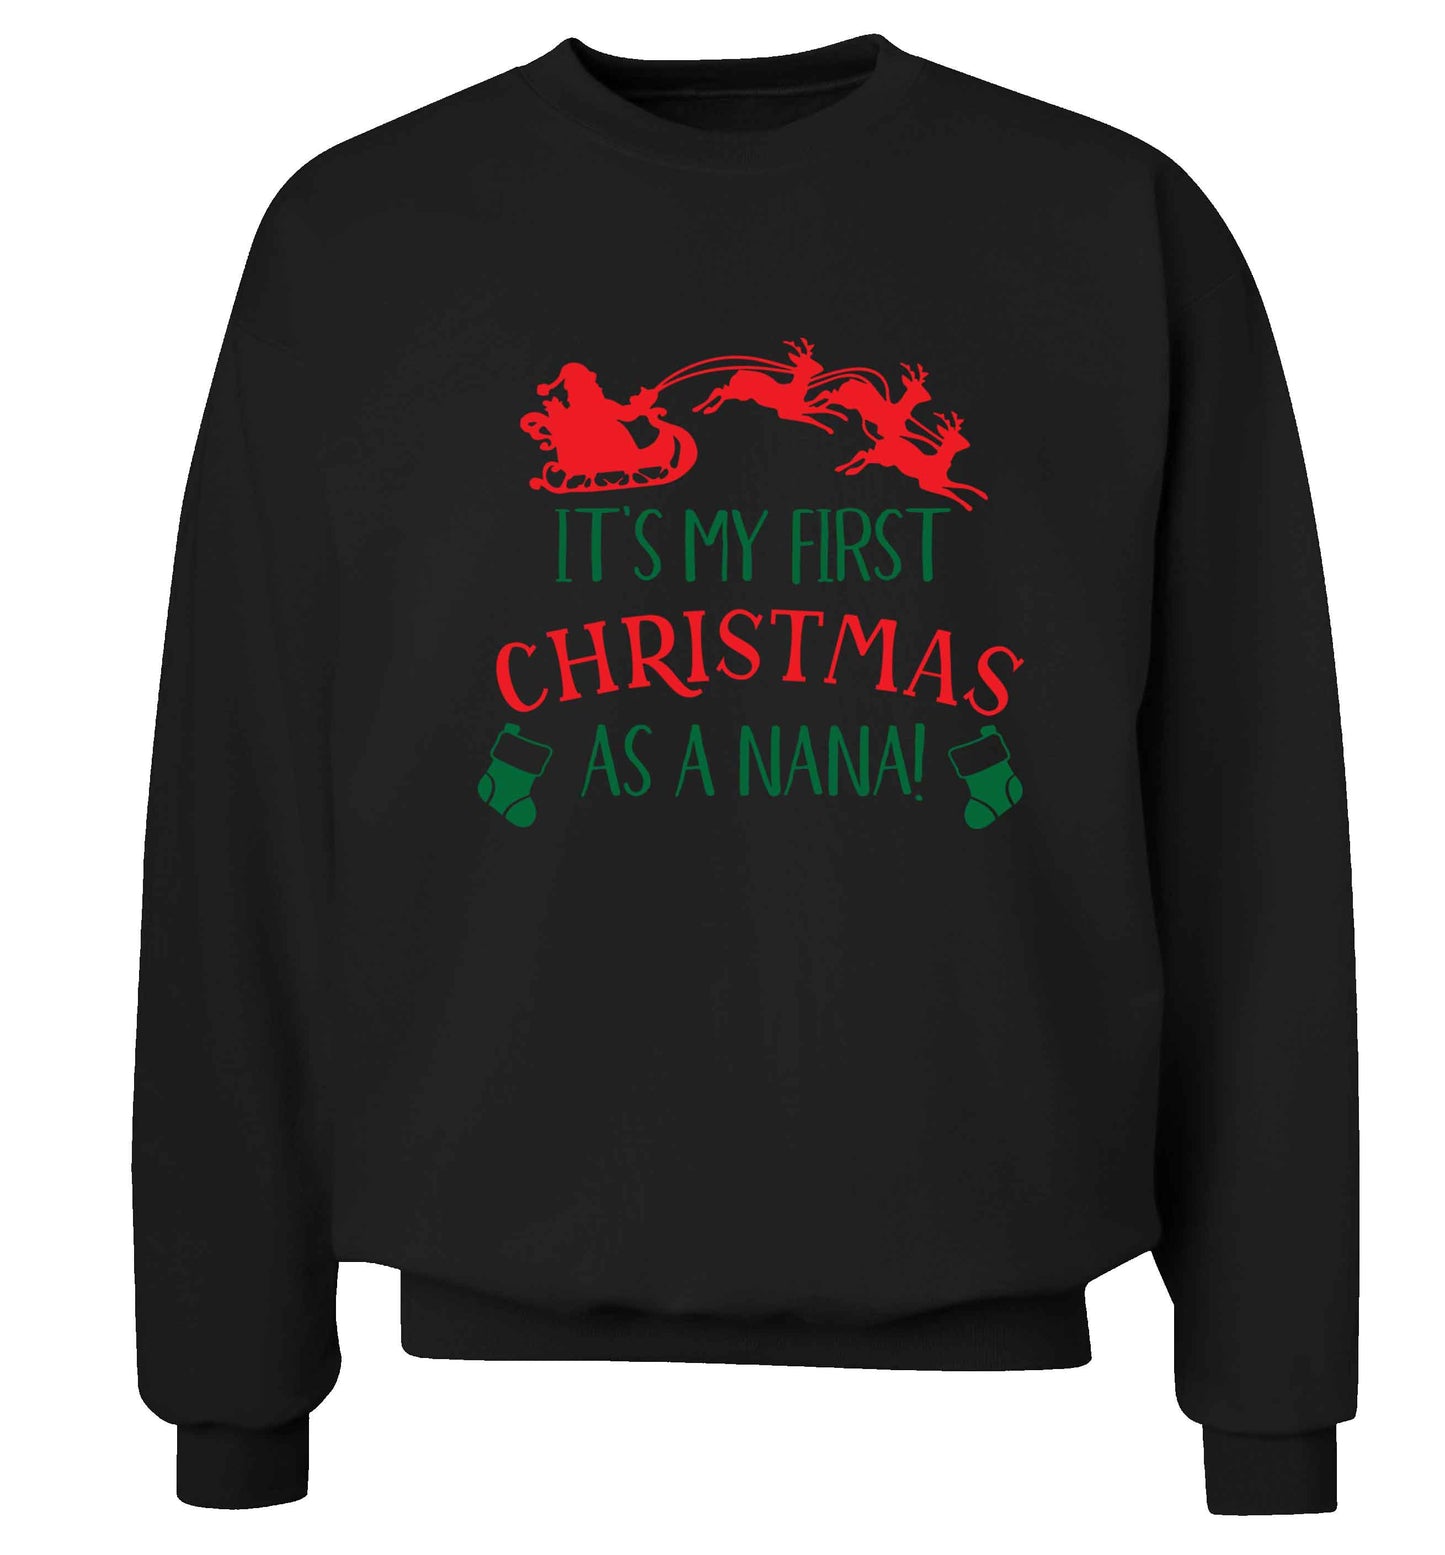 It's my first Christmas as a nana Adult's unisex black Sweater 2XL